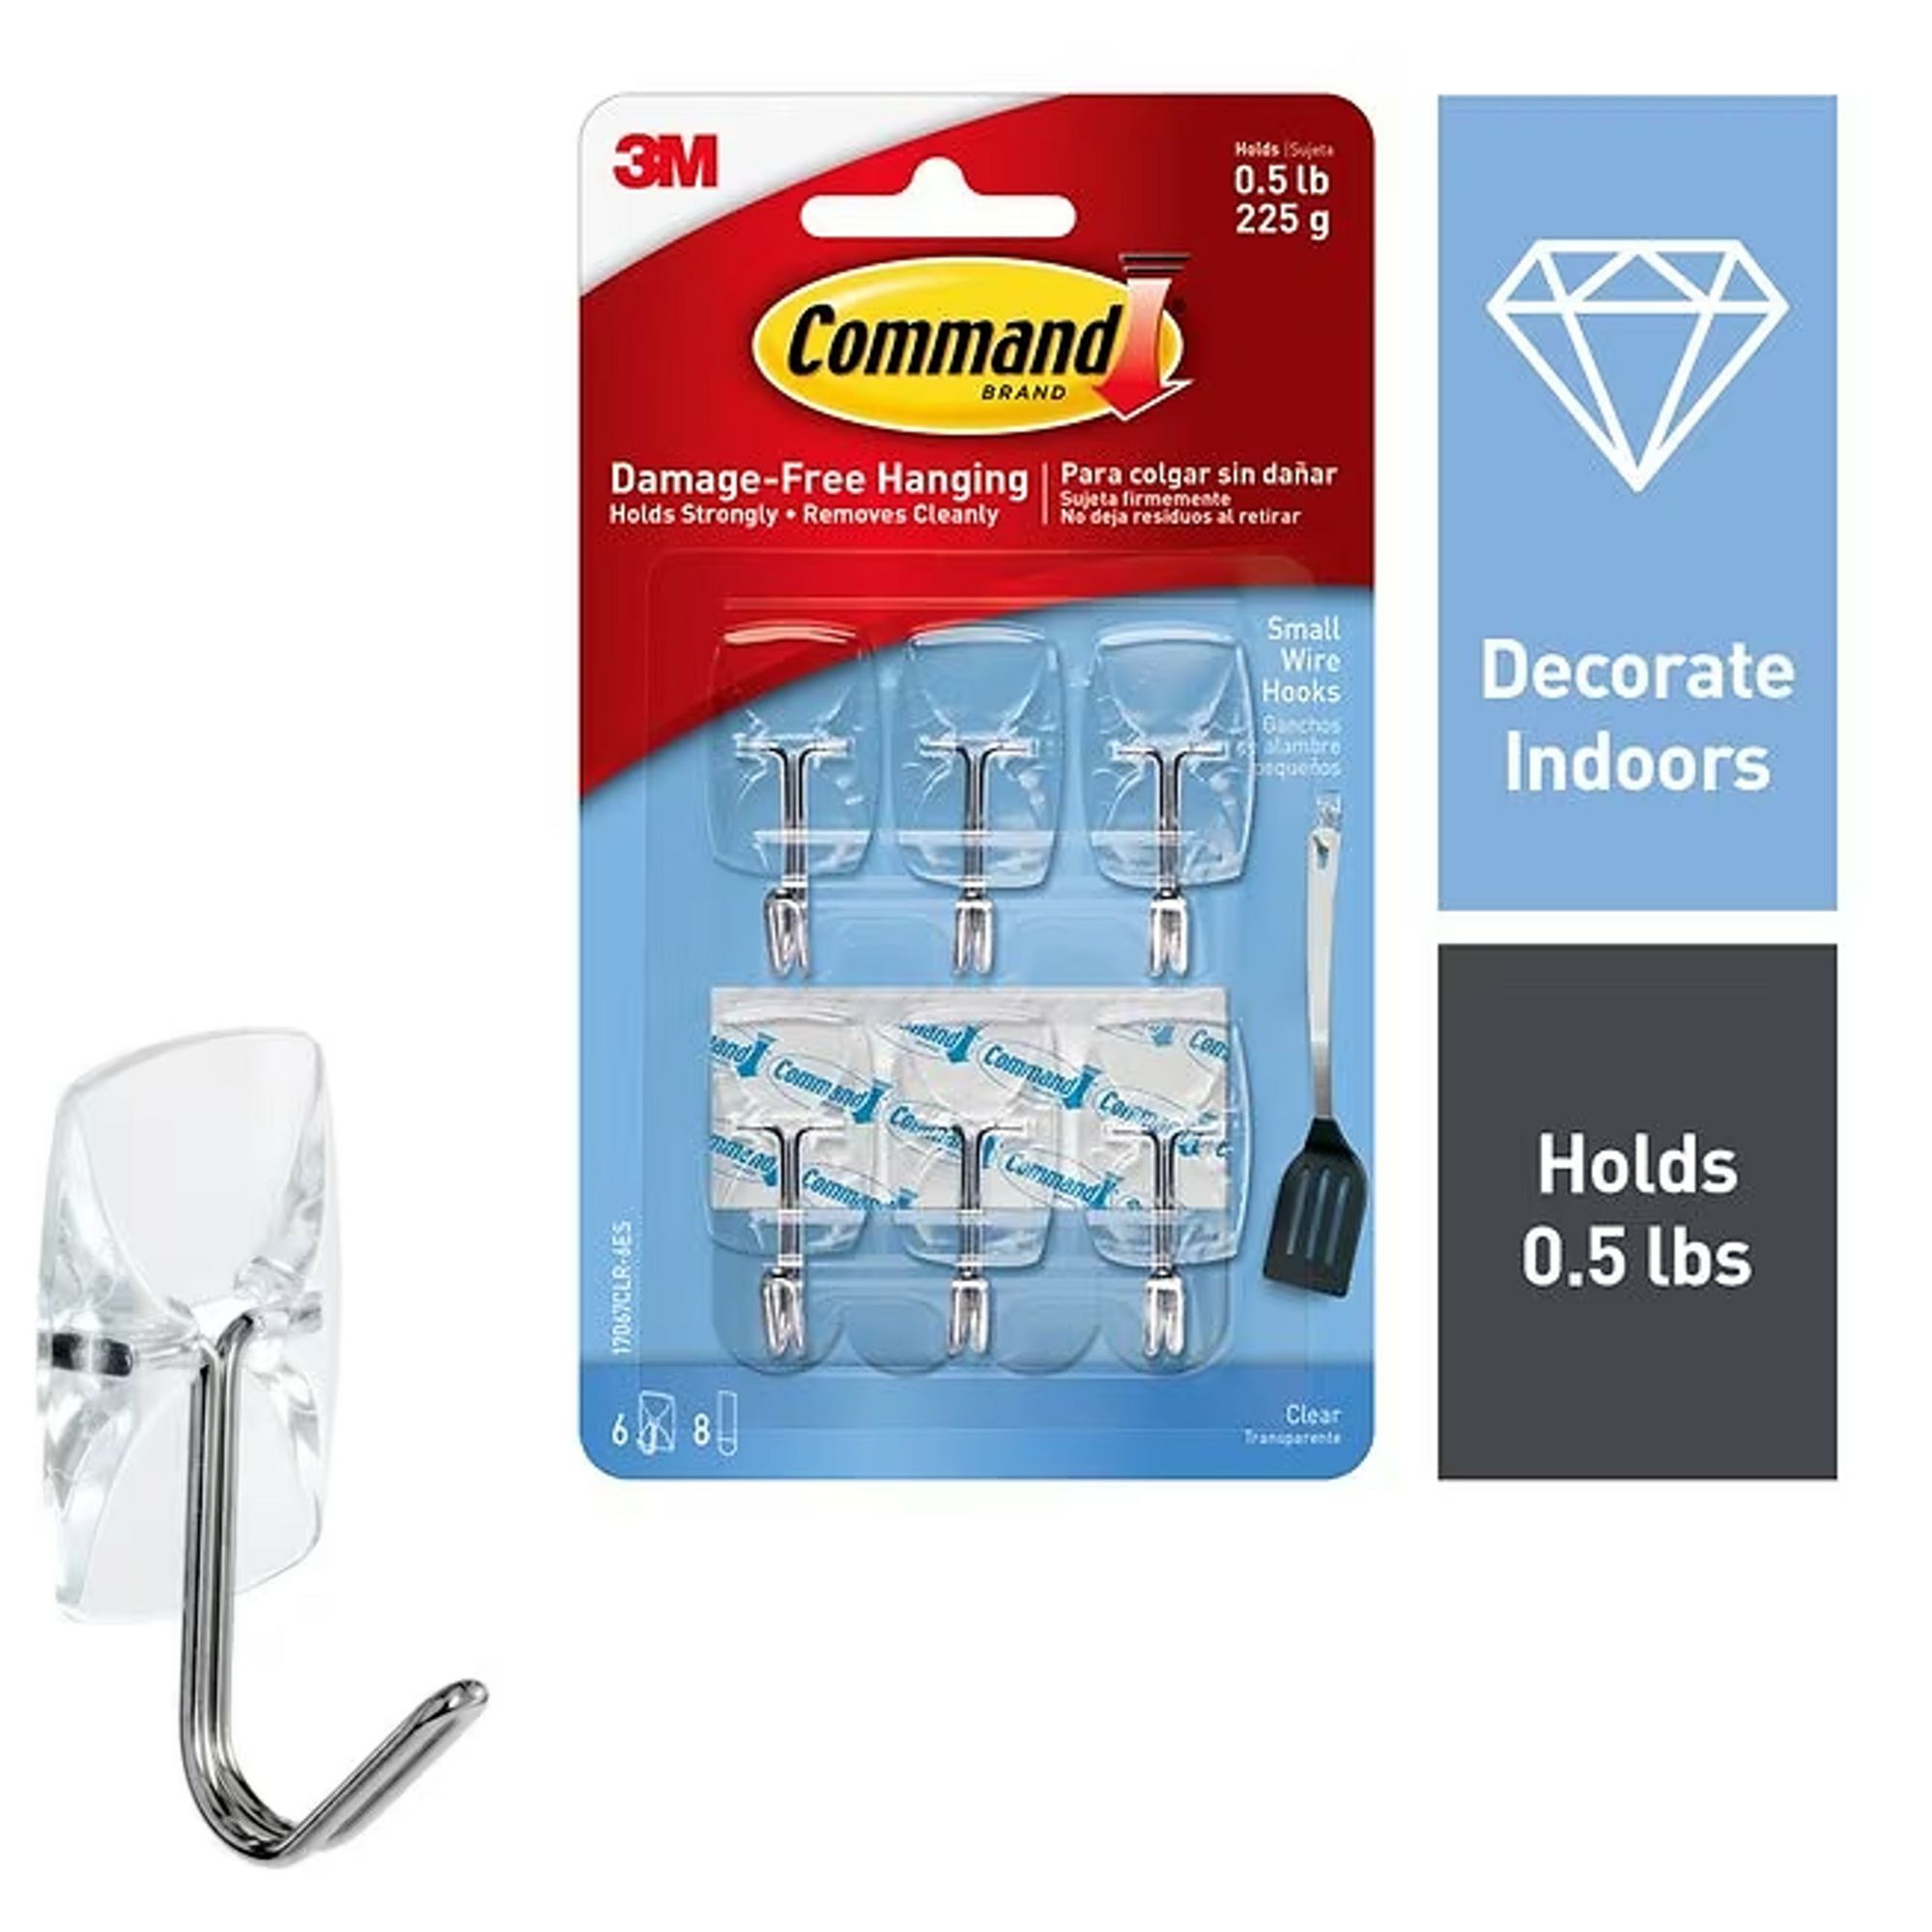 3M Command 5 Clear Wire Hooks - Small 17607CLR-5 at Wades